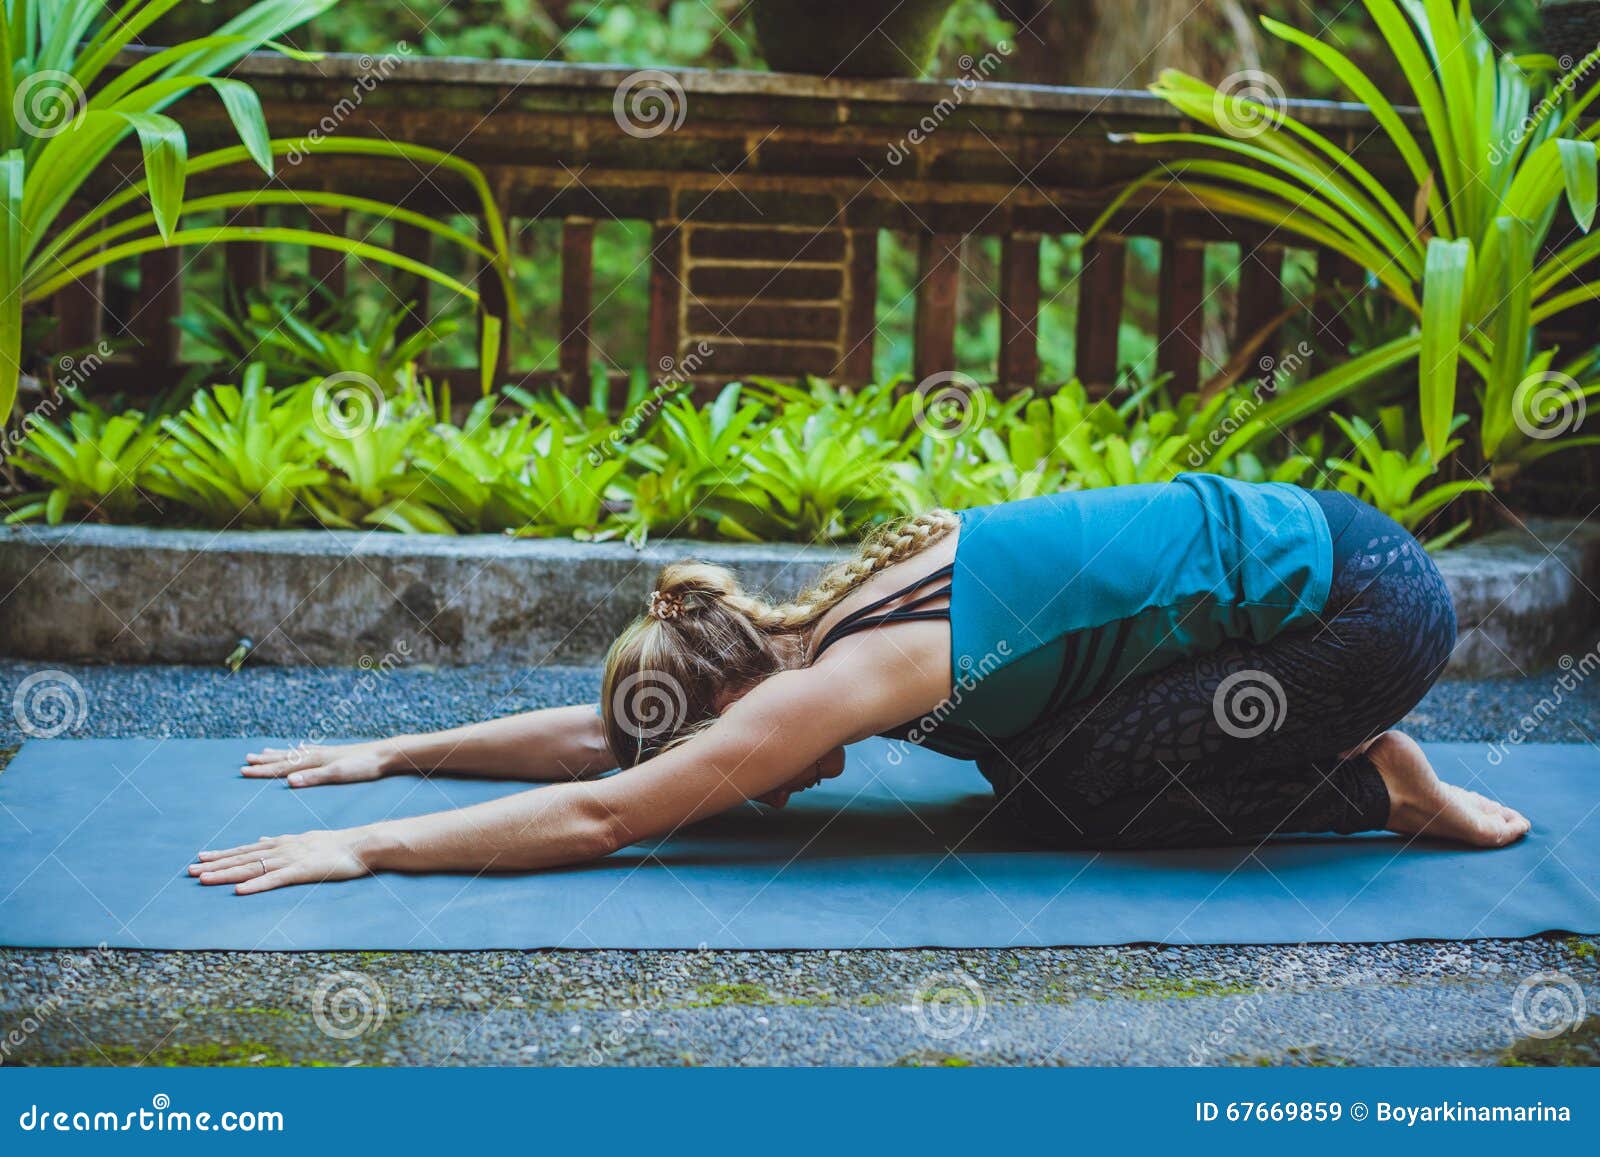 young woman doing yoga outside in natural environment